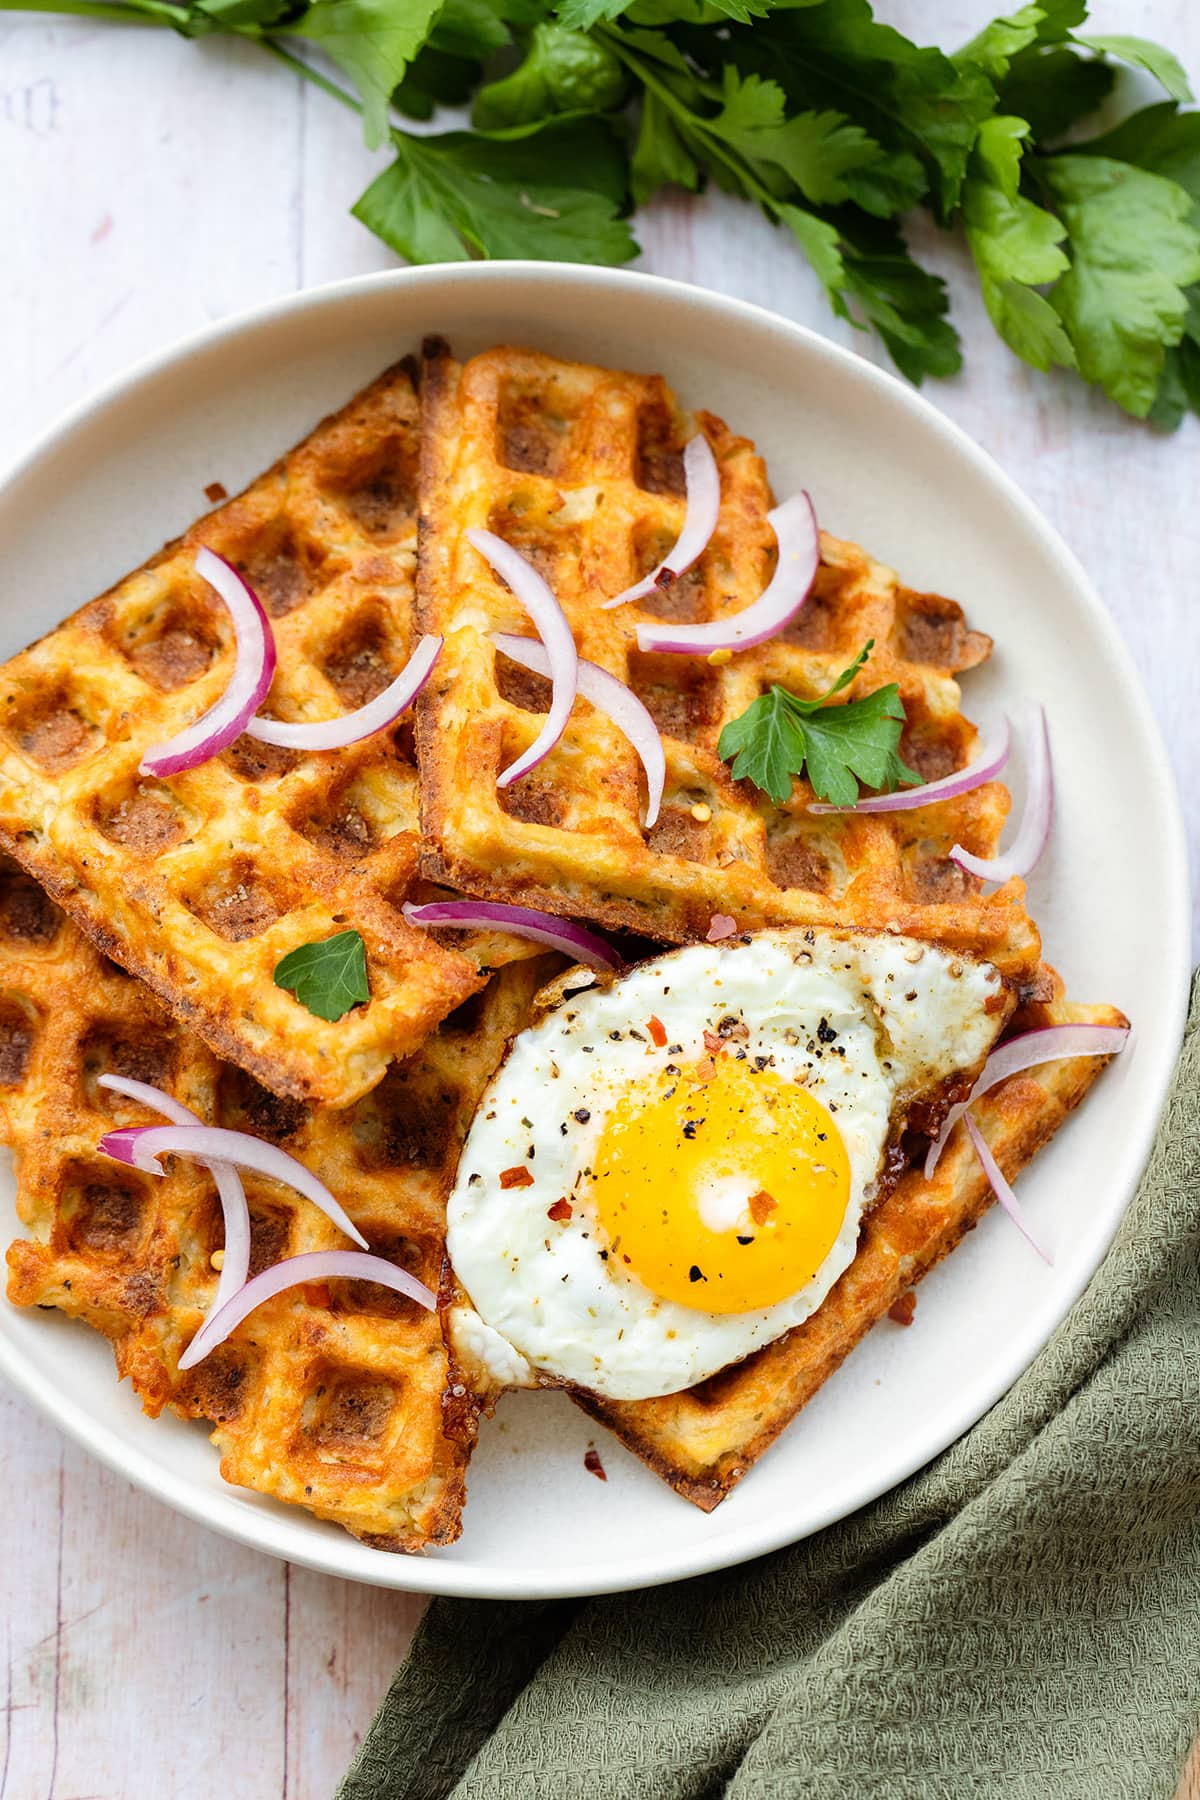 Four waffles on a white plate with a sunny side up egg on top and red onions.